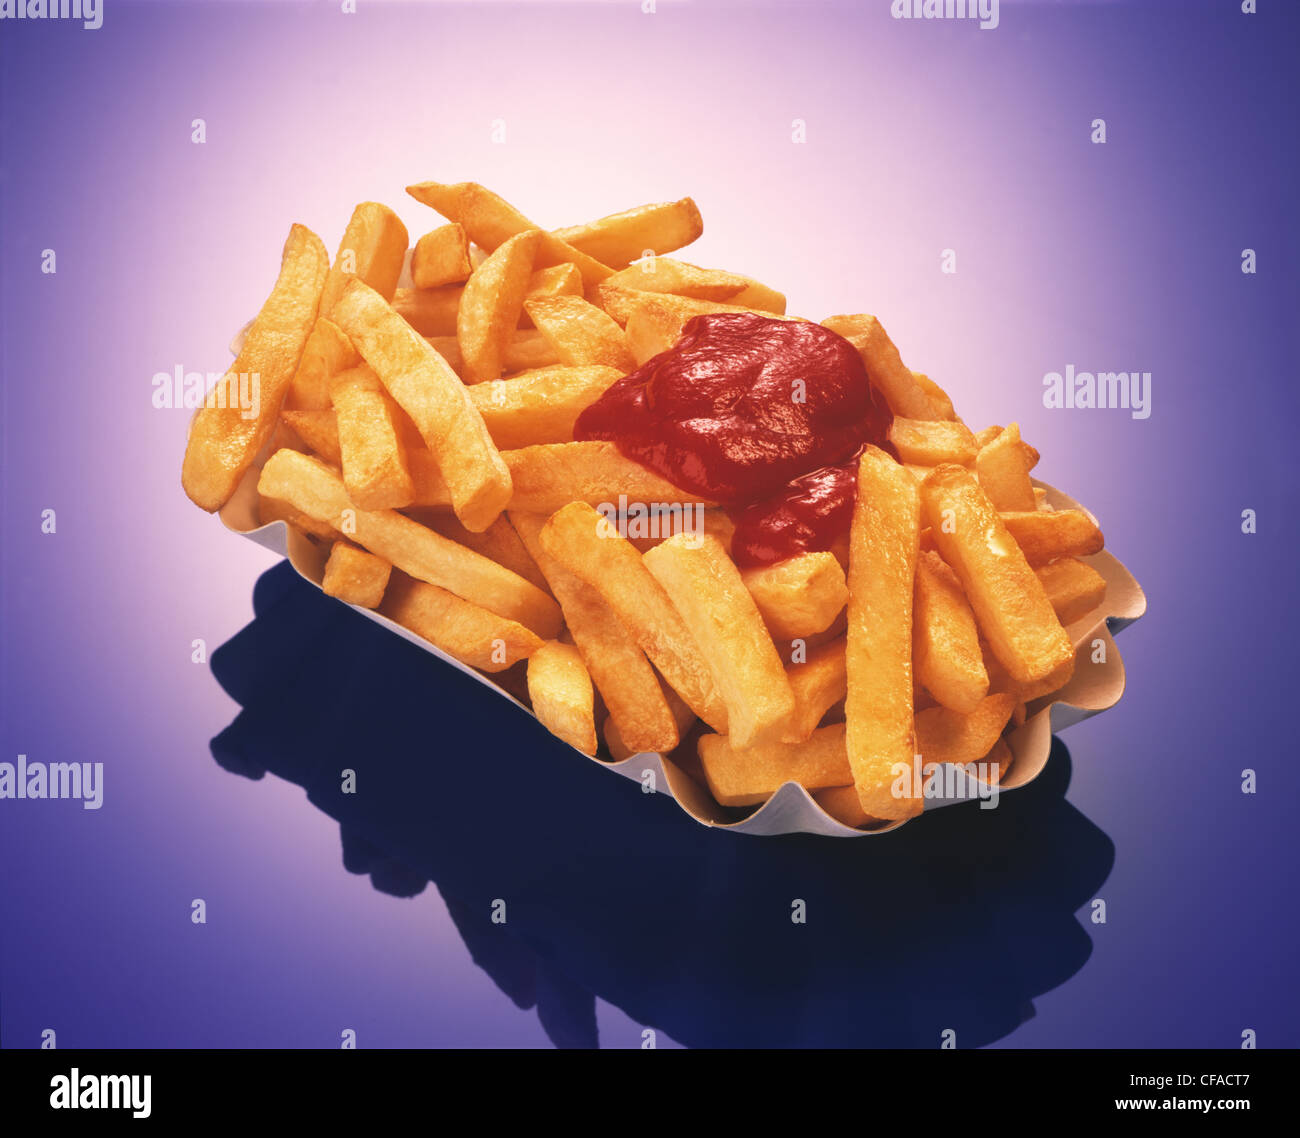 Cut out: french fries with ketchup Stock Photo